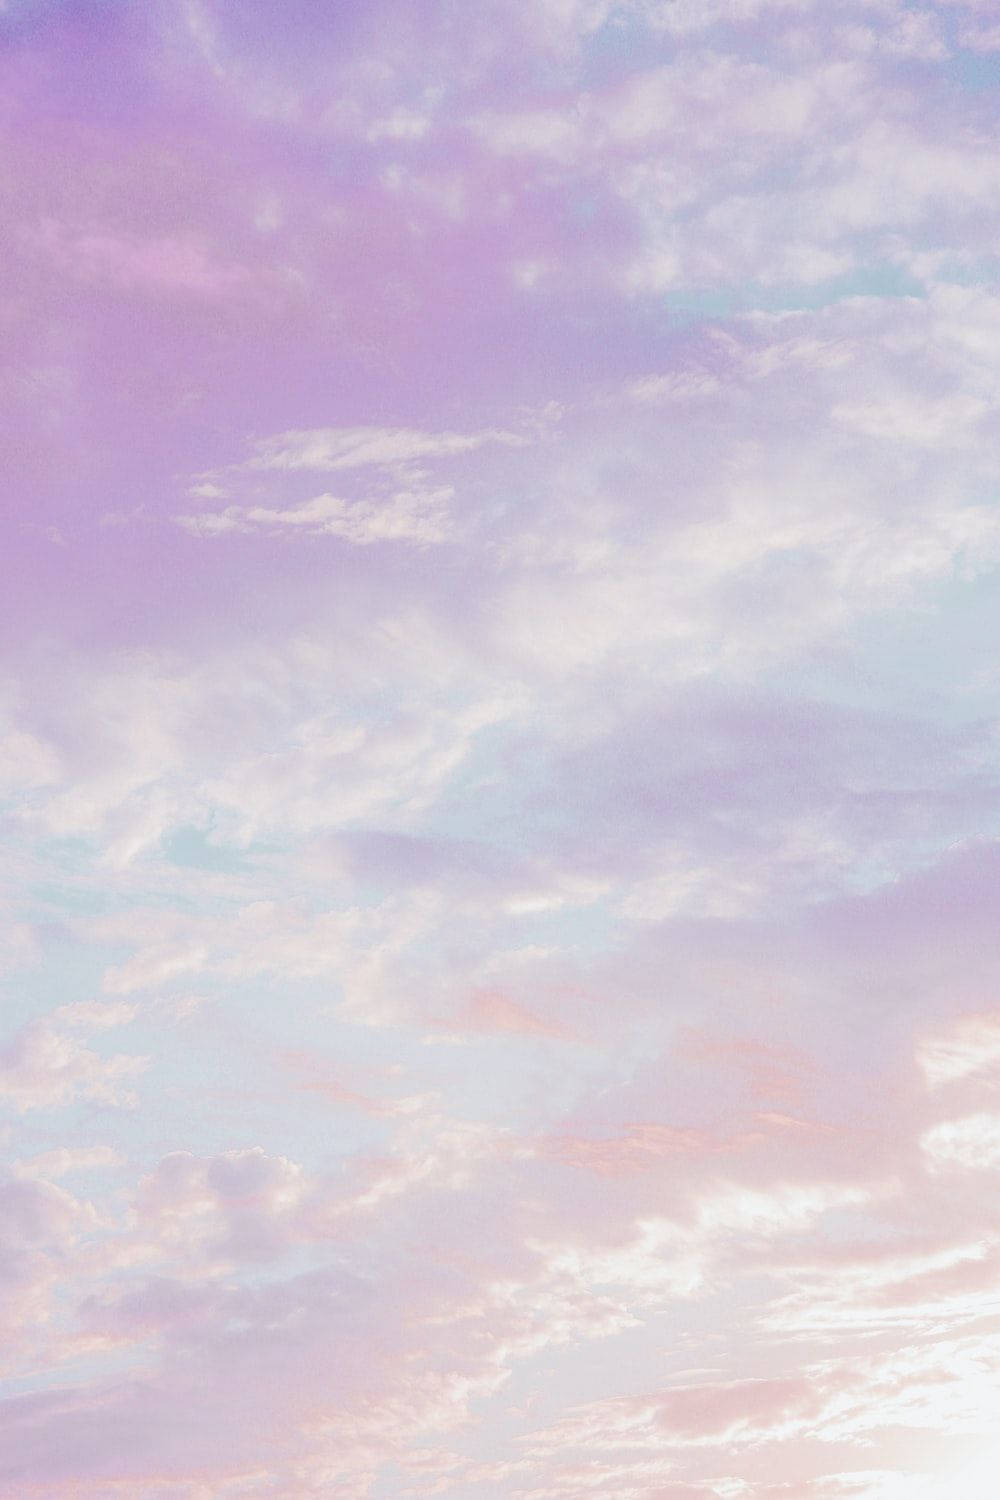 Purple Aesthetic Phone Thick Clouds Wallpaper